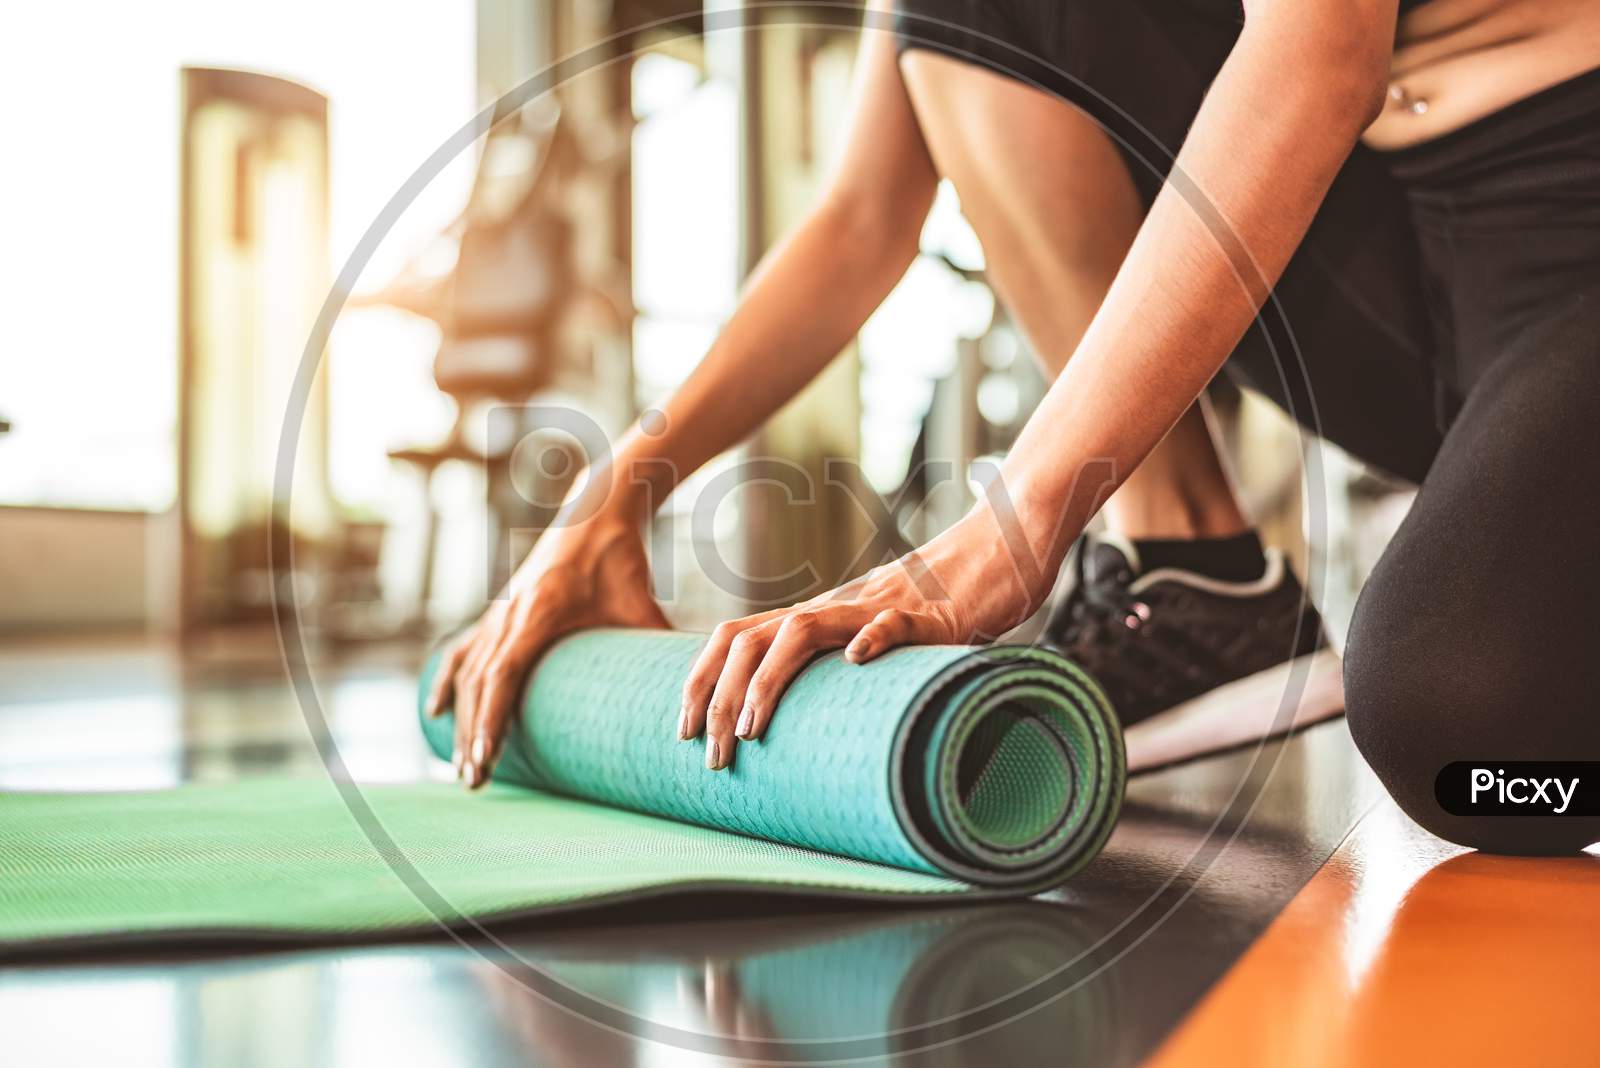 Close Up Of Sporty Woman Folding Yoga Mattress In Sport Fitness Gym Training Center Background. Exercise Mat Rolling Keeping After Yoga Class. Workout And Sport Training Concept. Hands On Carpet